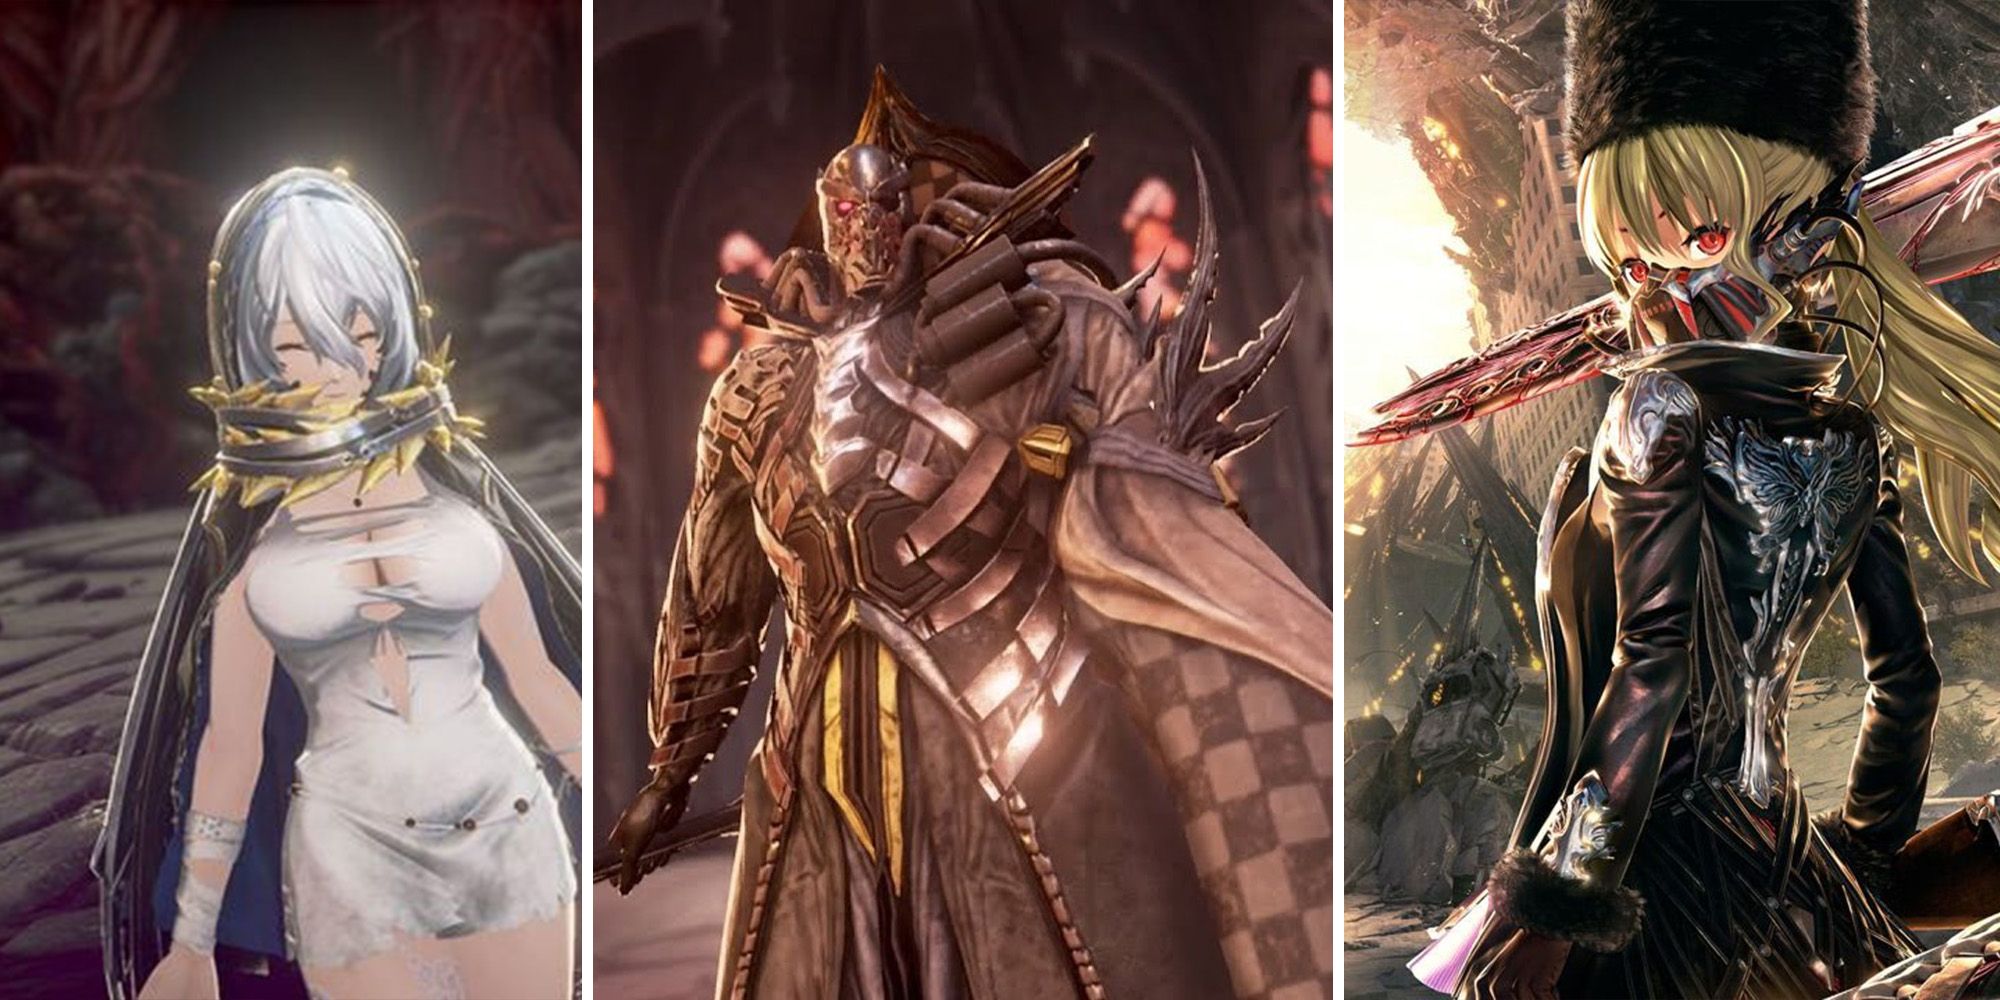 Code Vein: Outfit 1 must have an open chest area, Me: : r/codevein